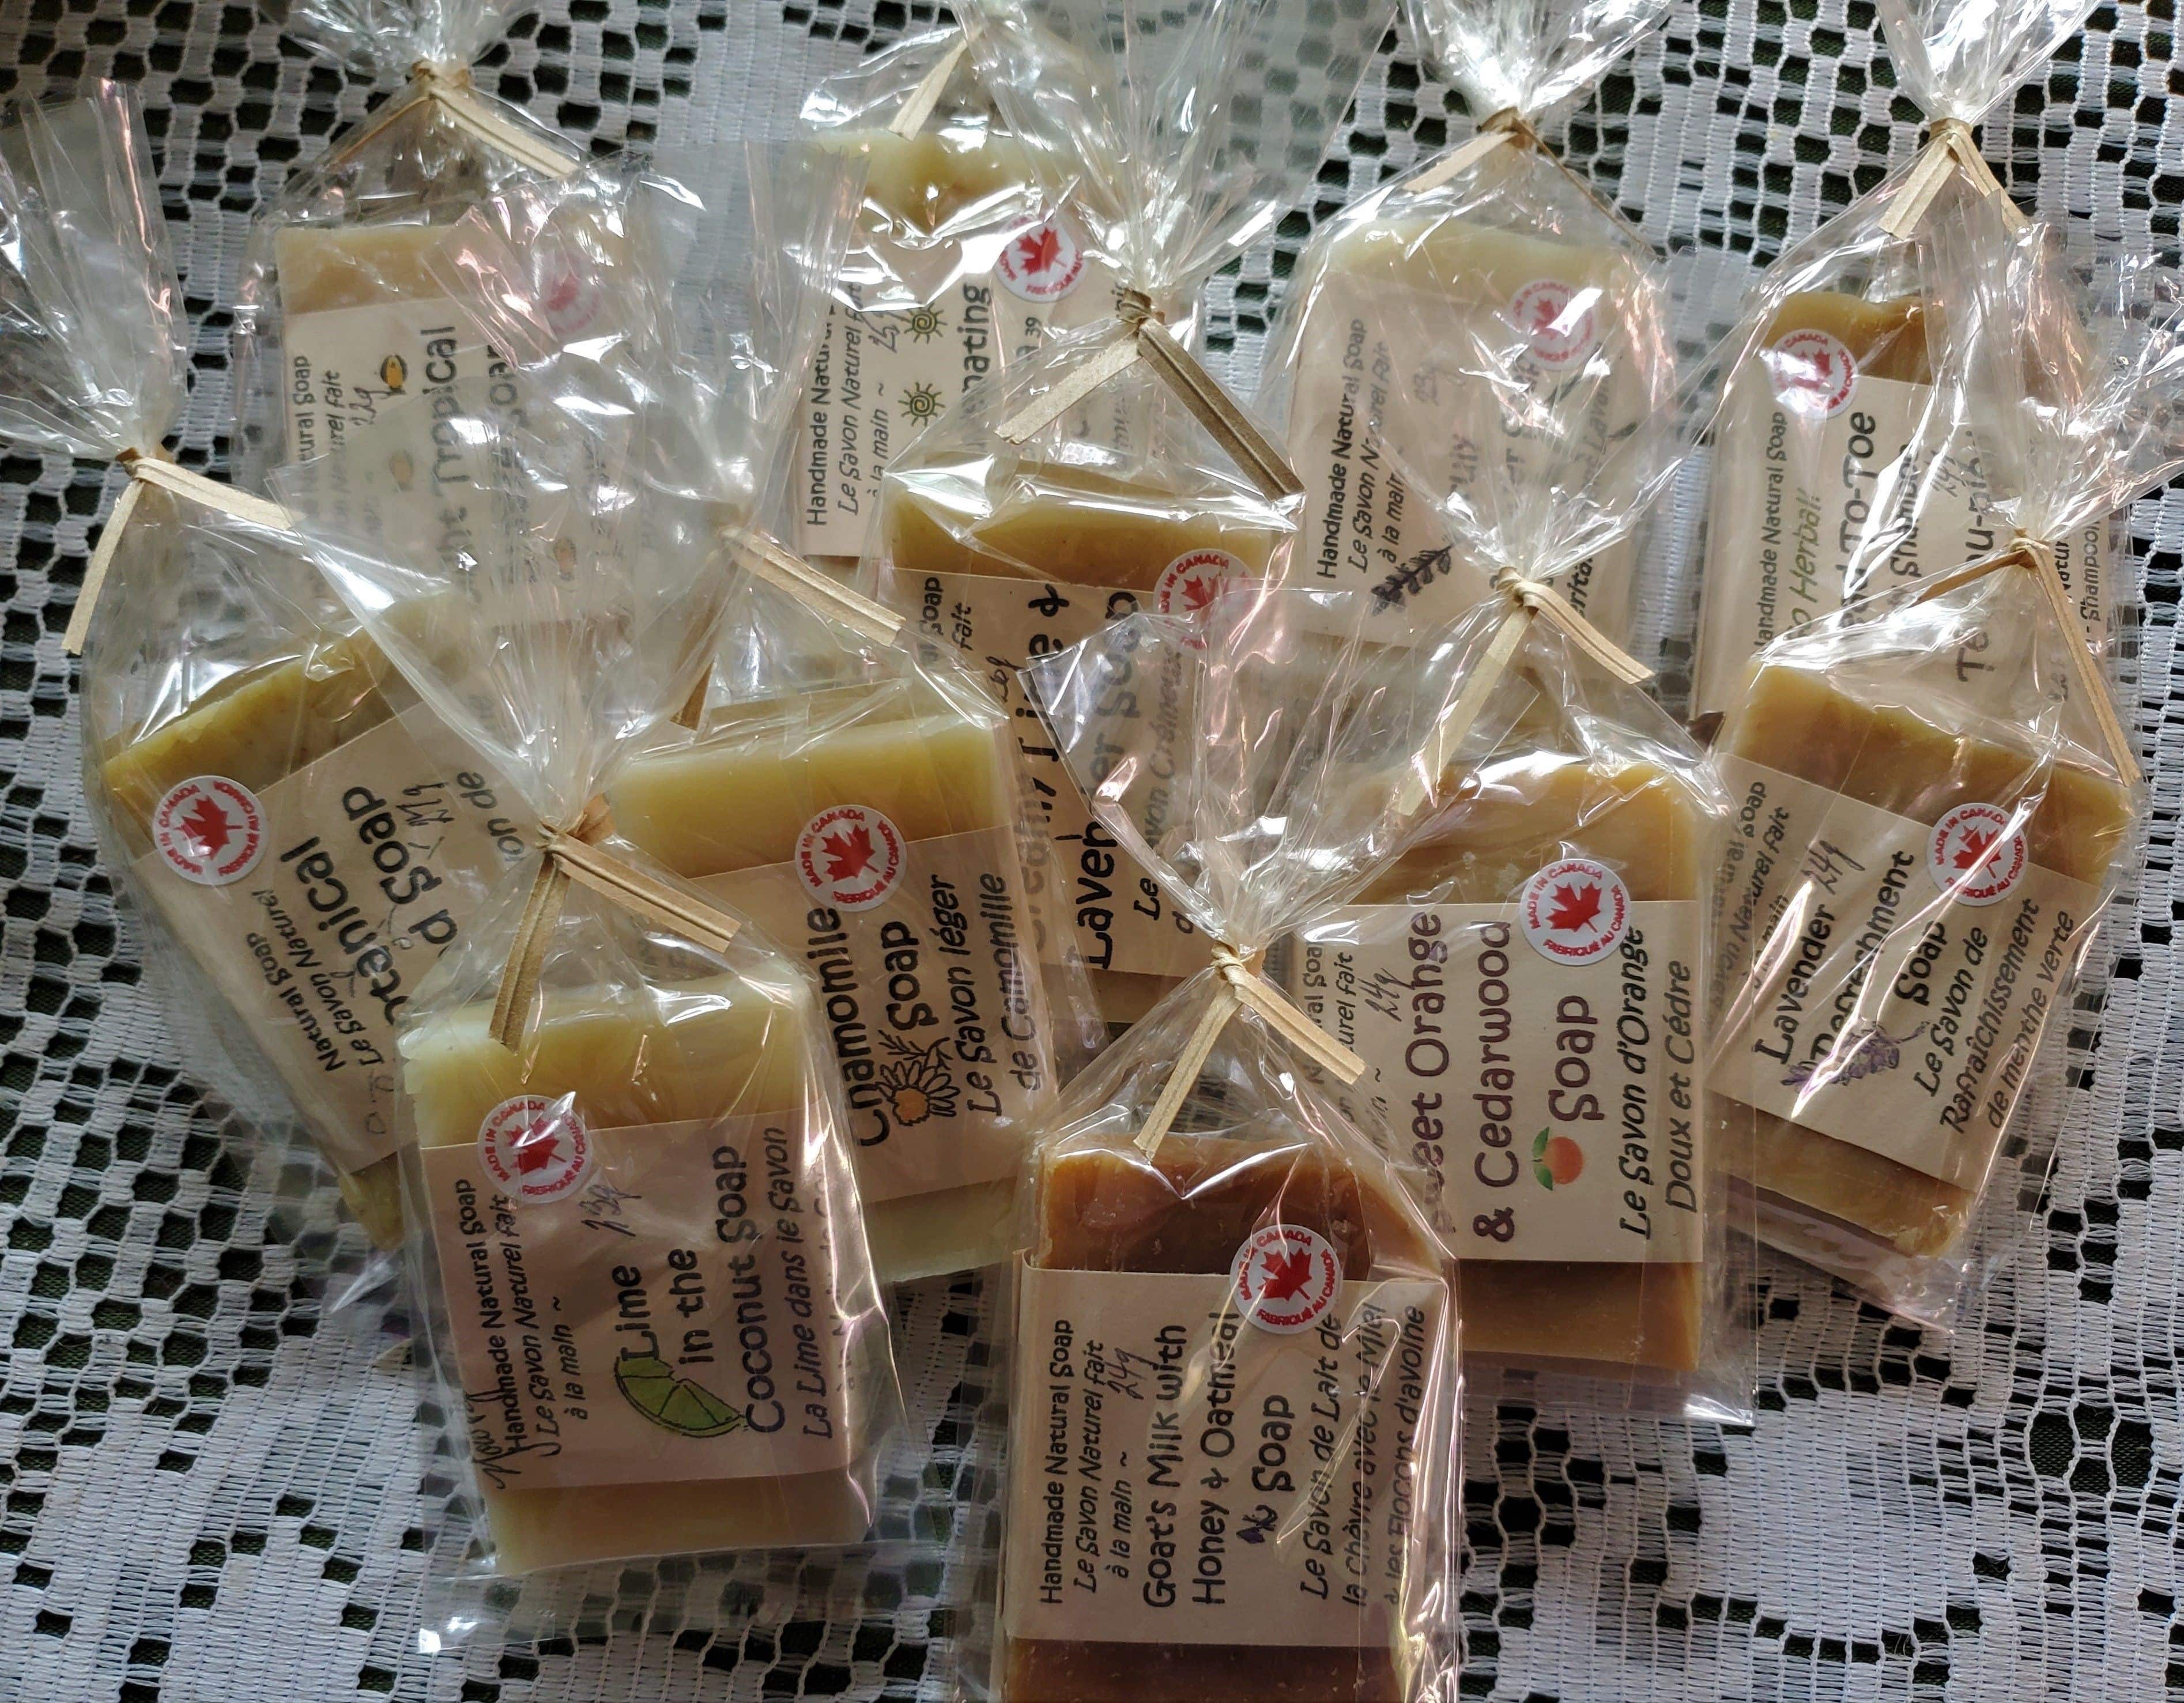 Small batch handmade soap made in Gimli Manitoba from fine quality all natural ingredients. Very reasonable pricing for shower and wedding favours.